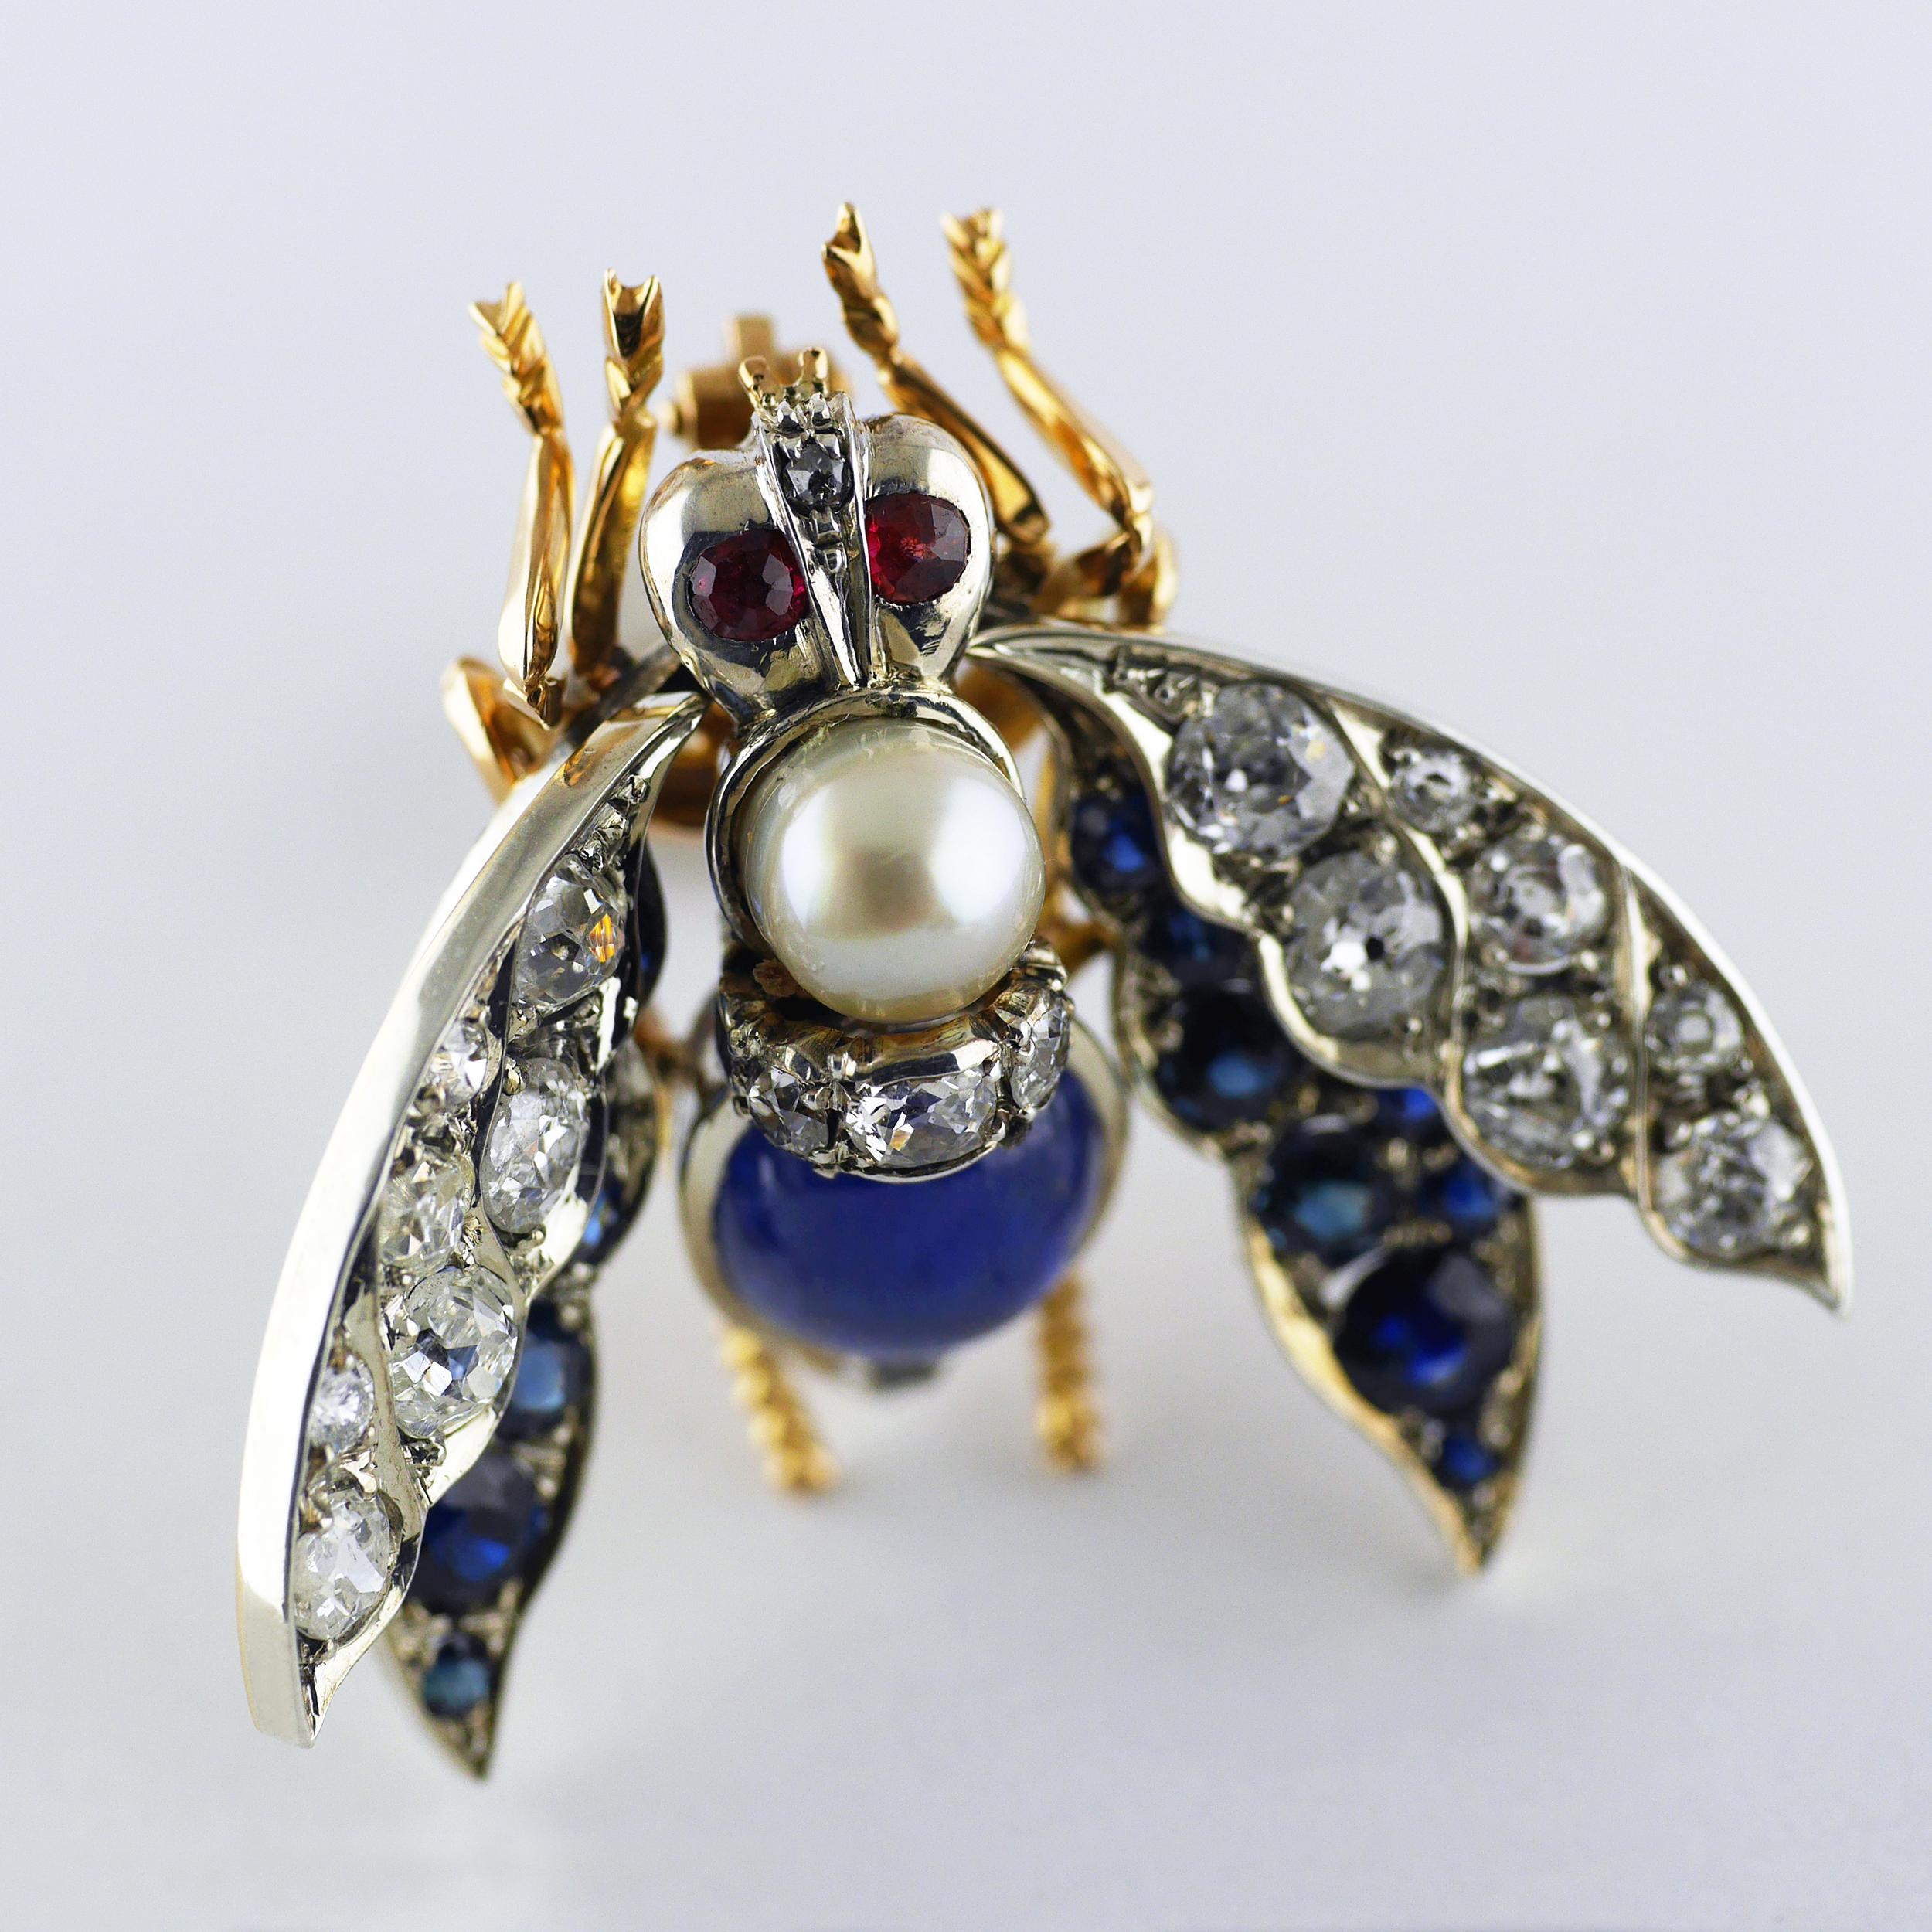 An exceptional, exquisite and well preserved Victorian brooch in the form of a bee with ruby eyes, sapphire and diamond wings, natural pearl and cabochon natural untreated Burma Sapphire.

Mounted in 18ct rose gold and silver set, intricately formed